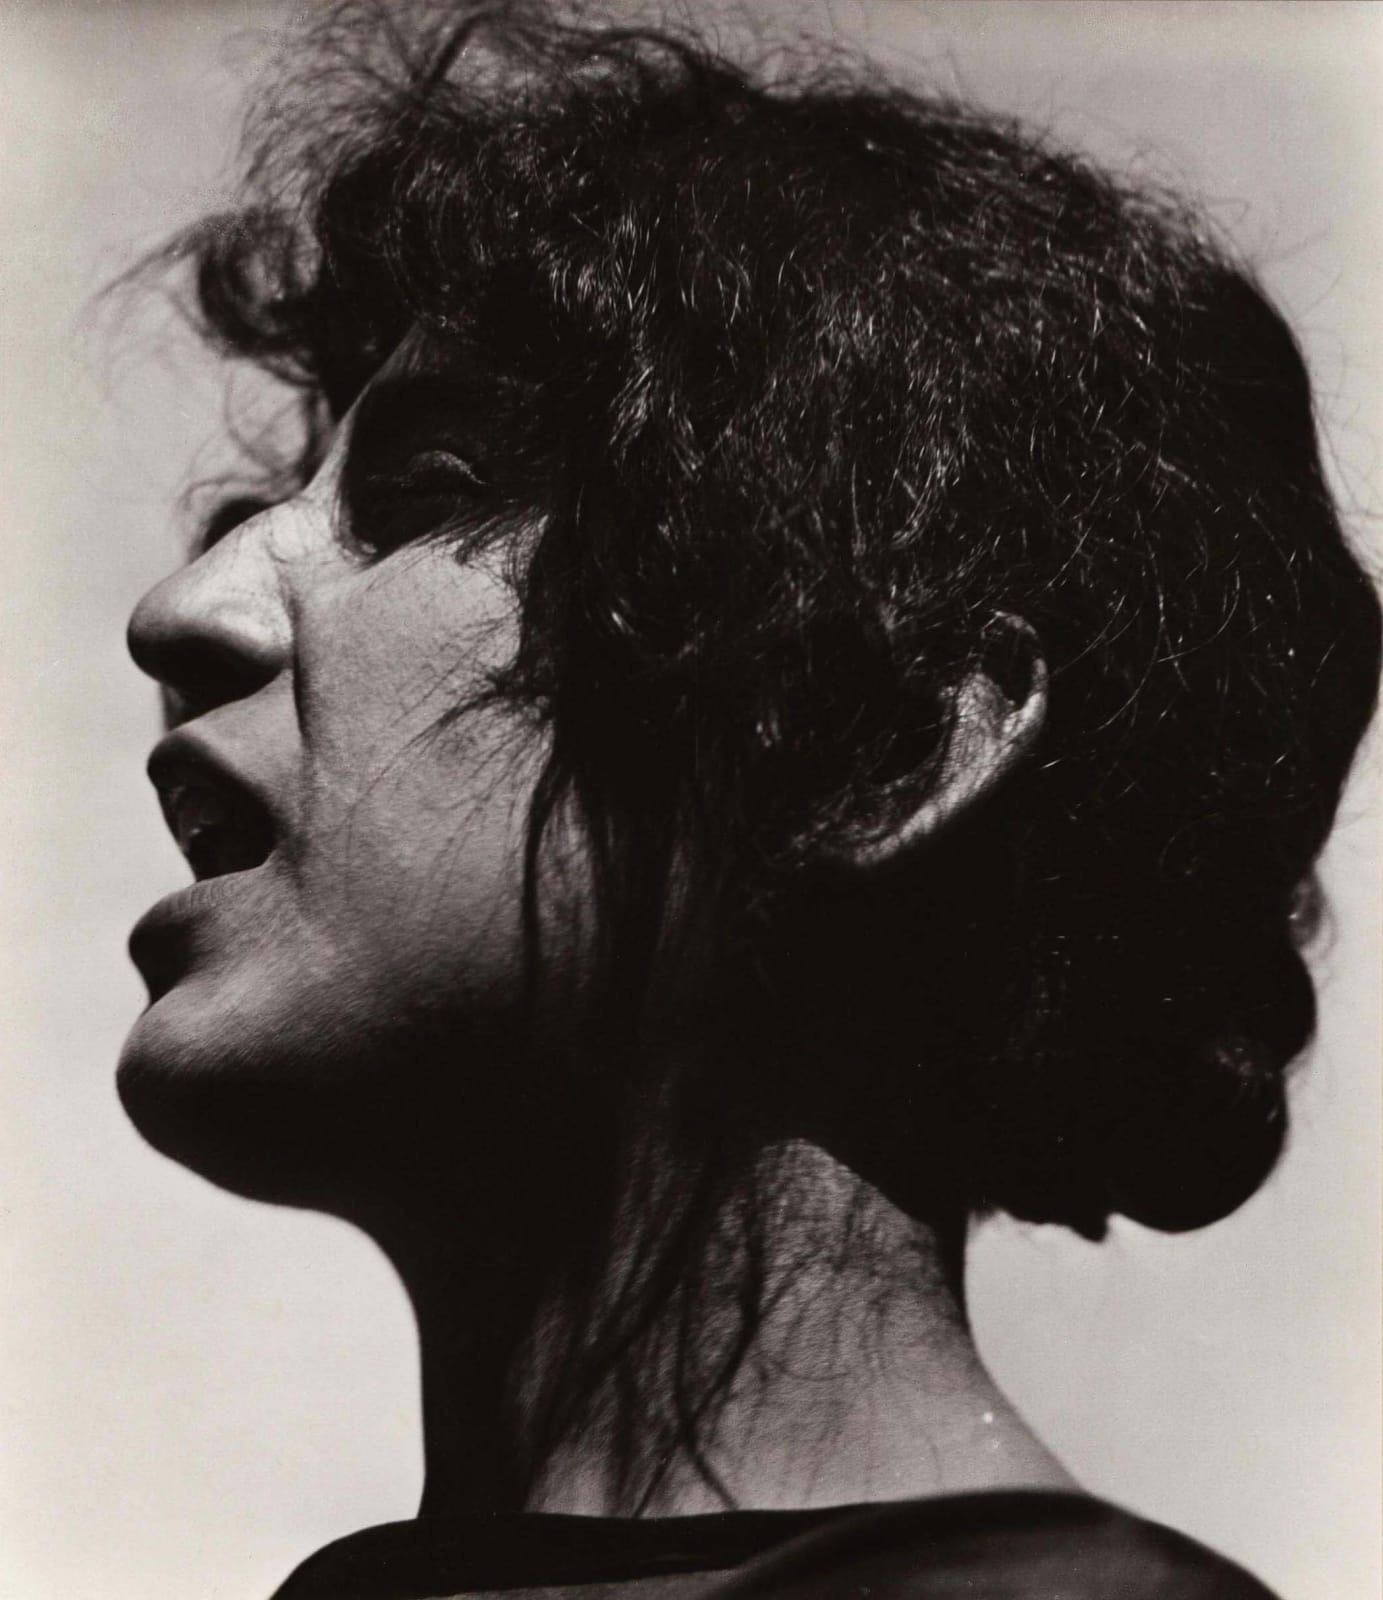 portrait of Tina Modotti, mid-speech with her mouth agape, taken in Guadalupe, Mexico by Edward Weston